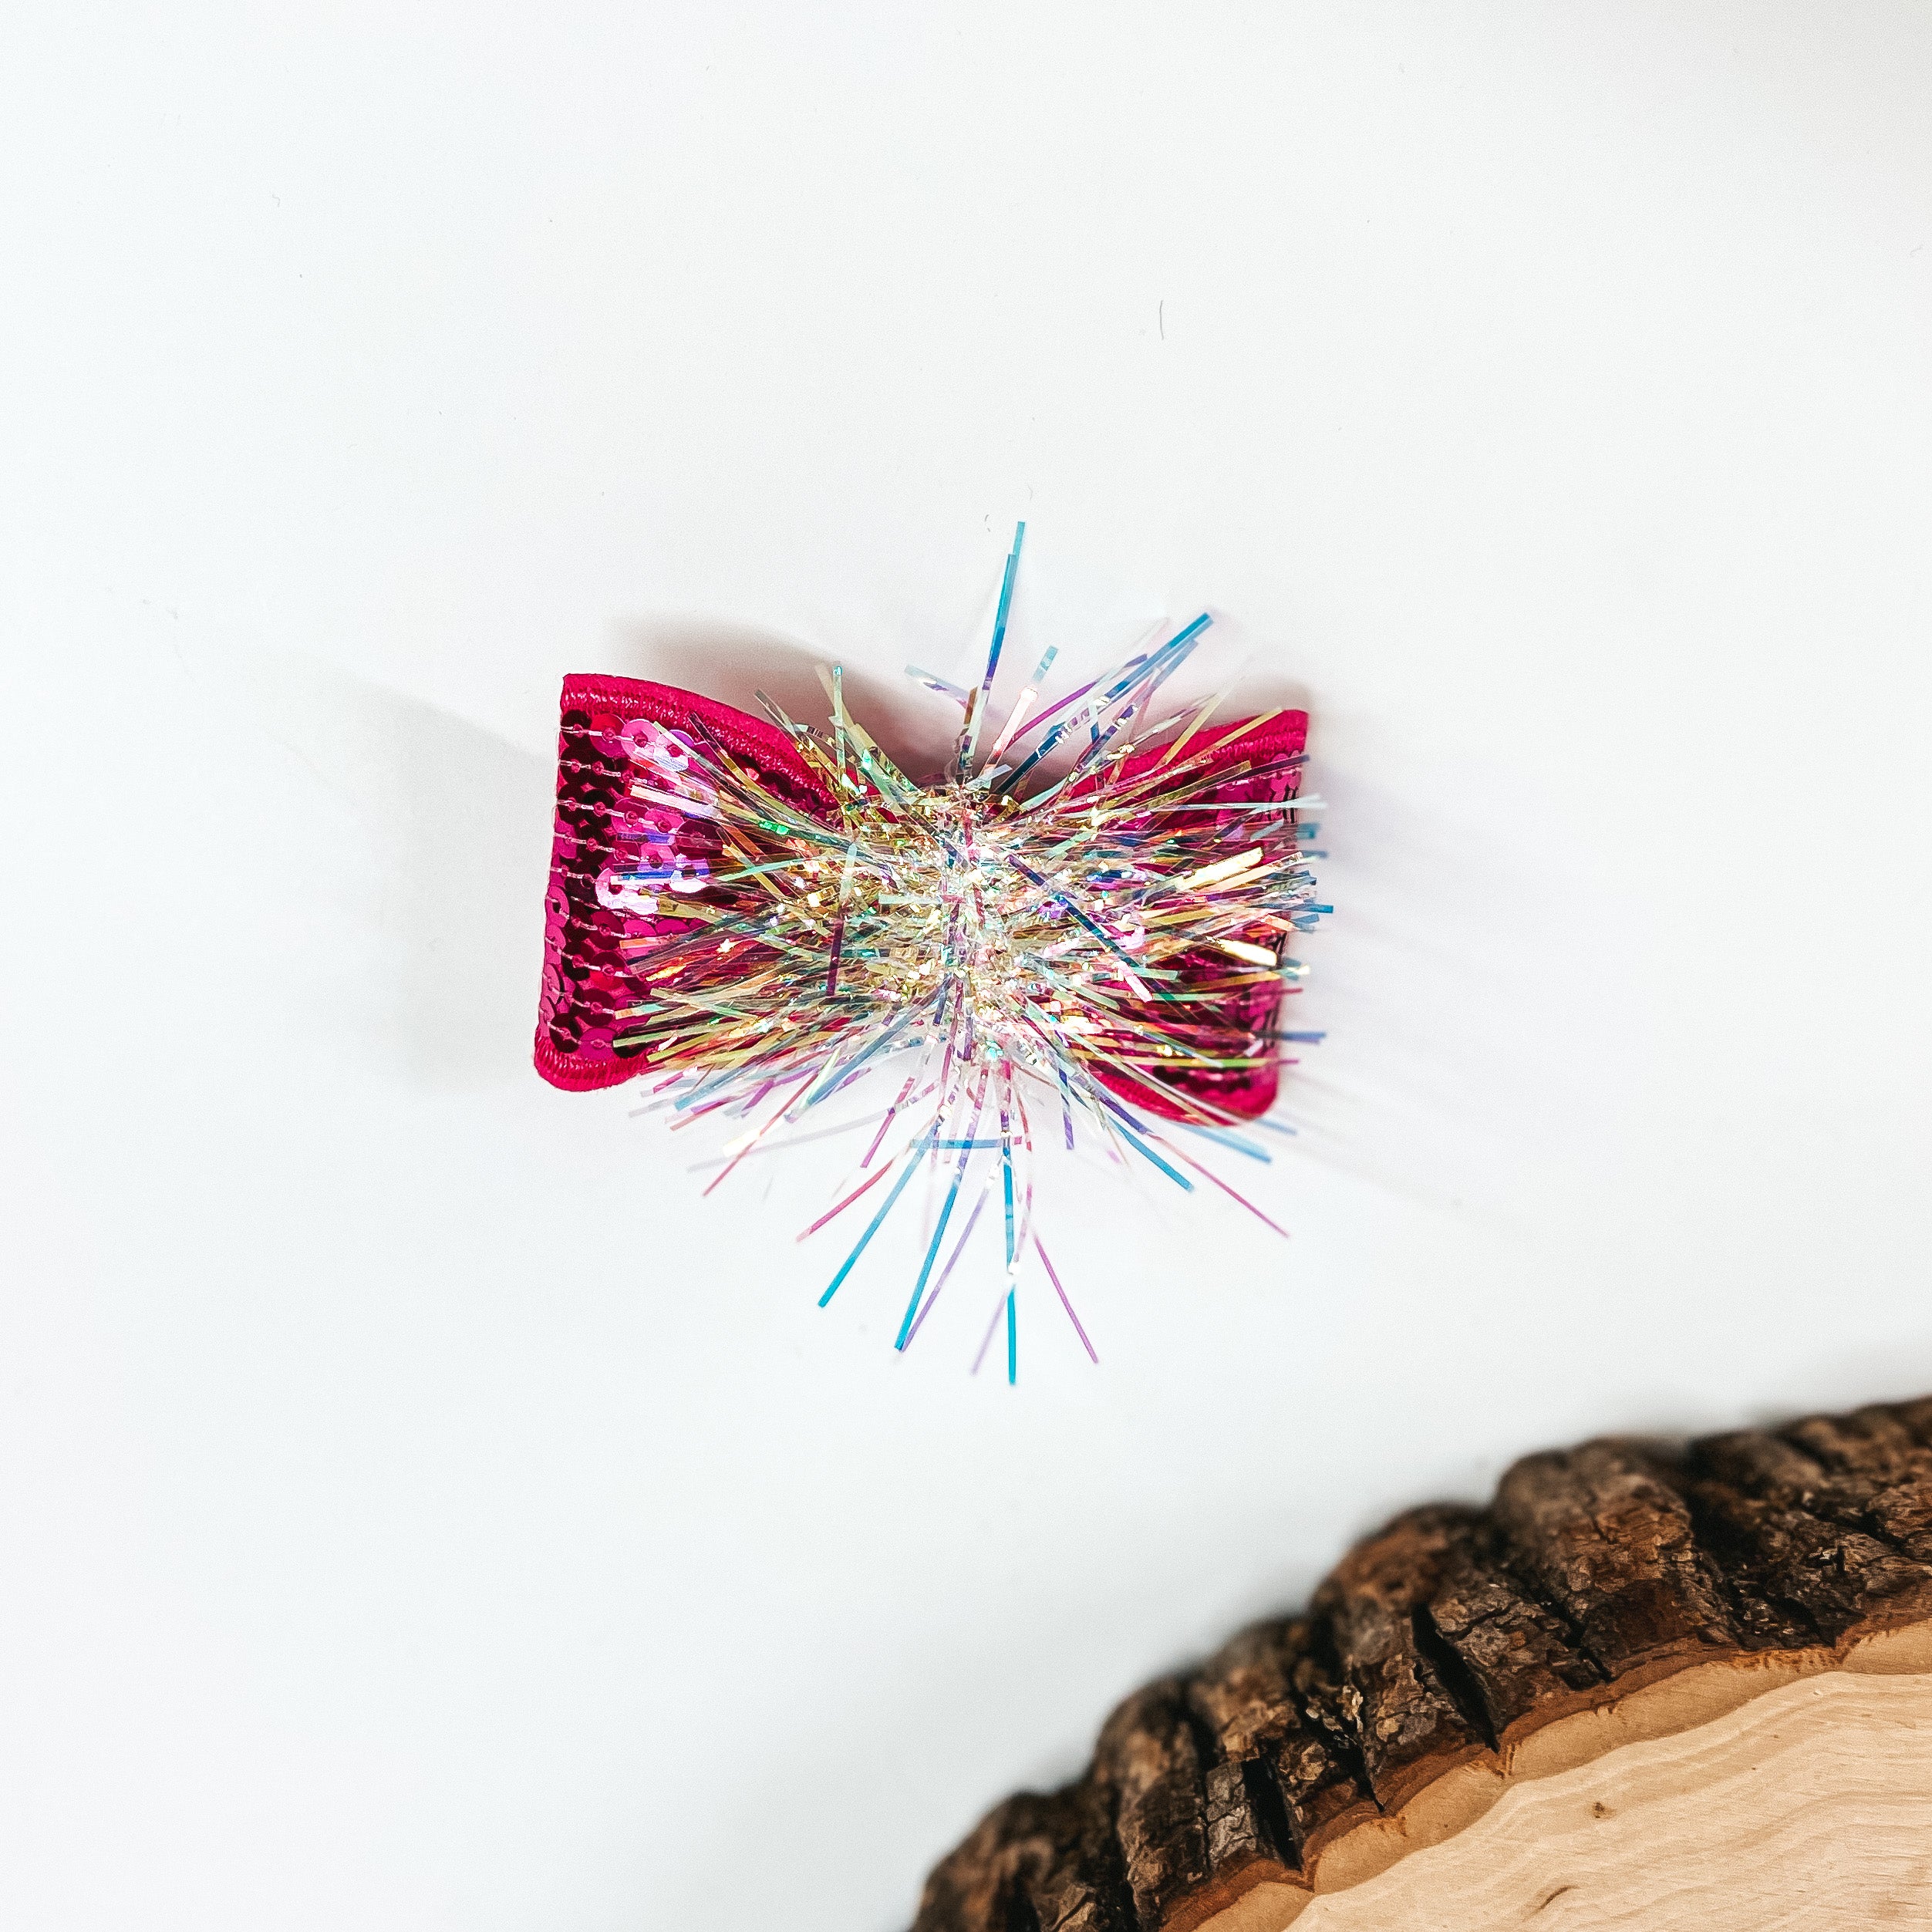 This is a small hot pink sequin bow with a tinsel center, this bow is taken on a  white background with a slab of wood in the corner as decor.